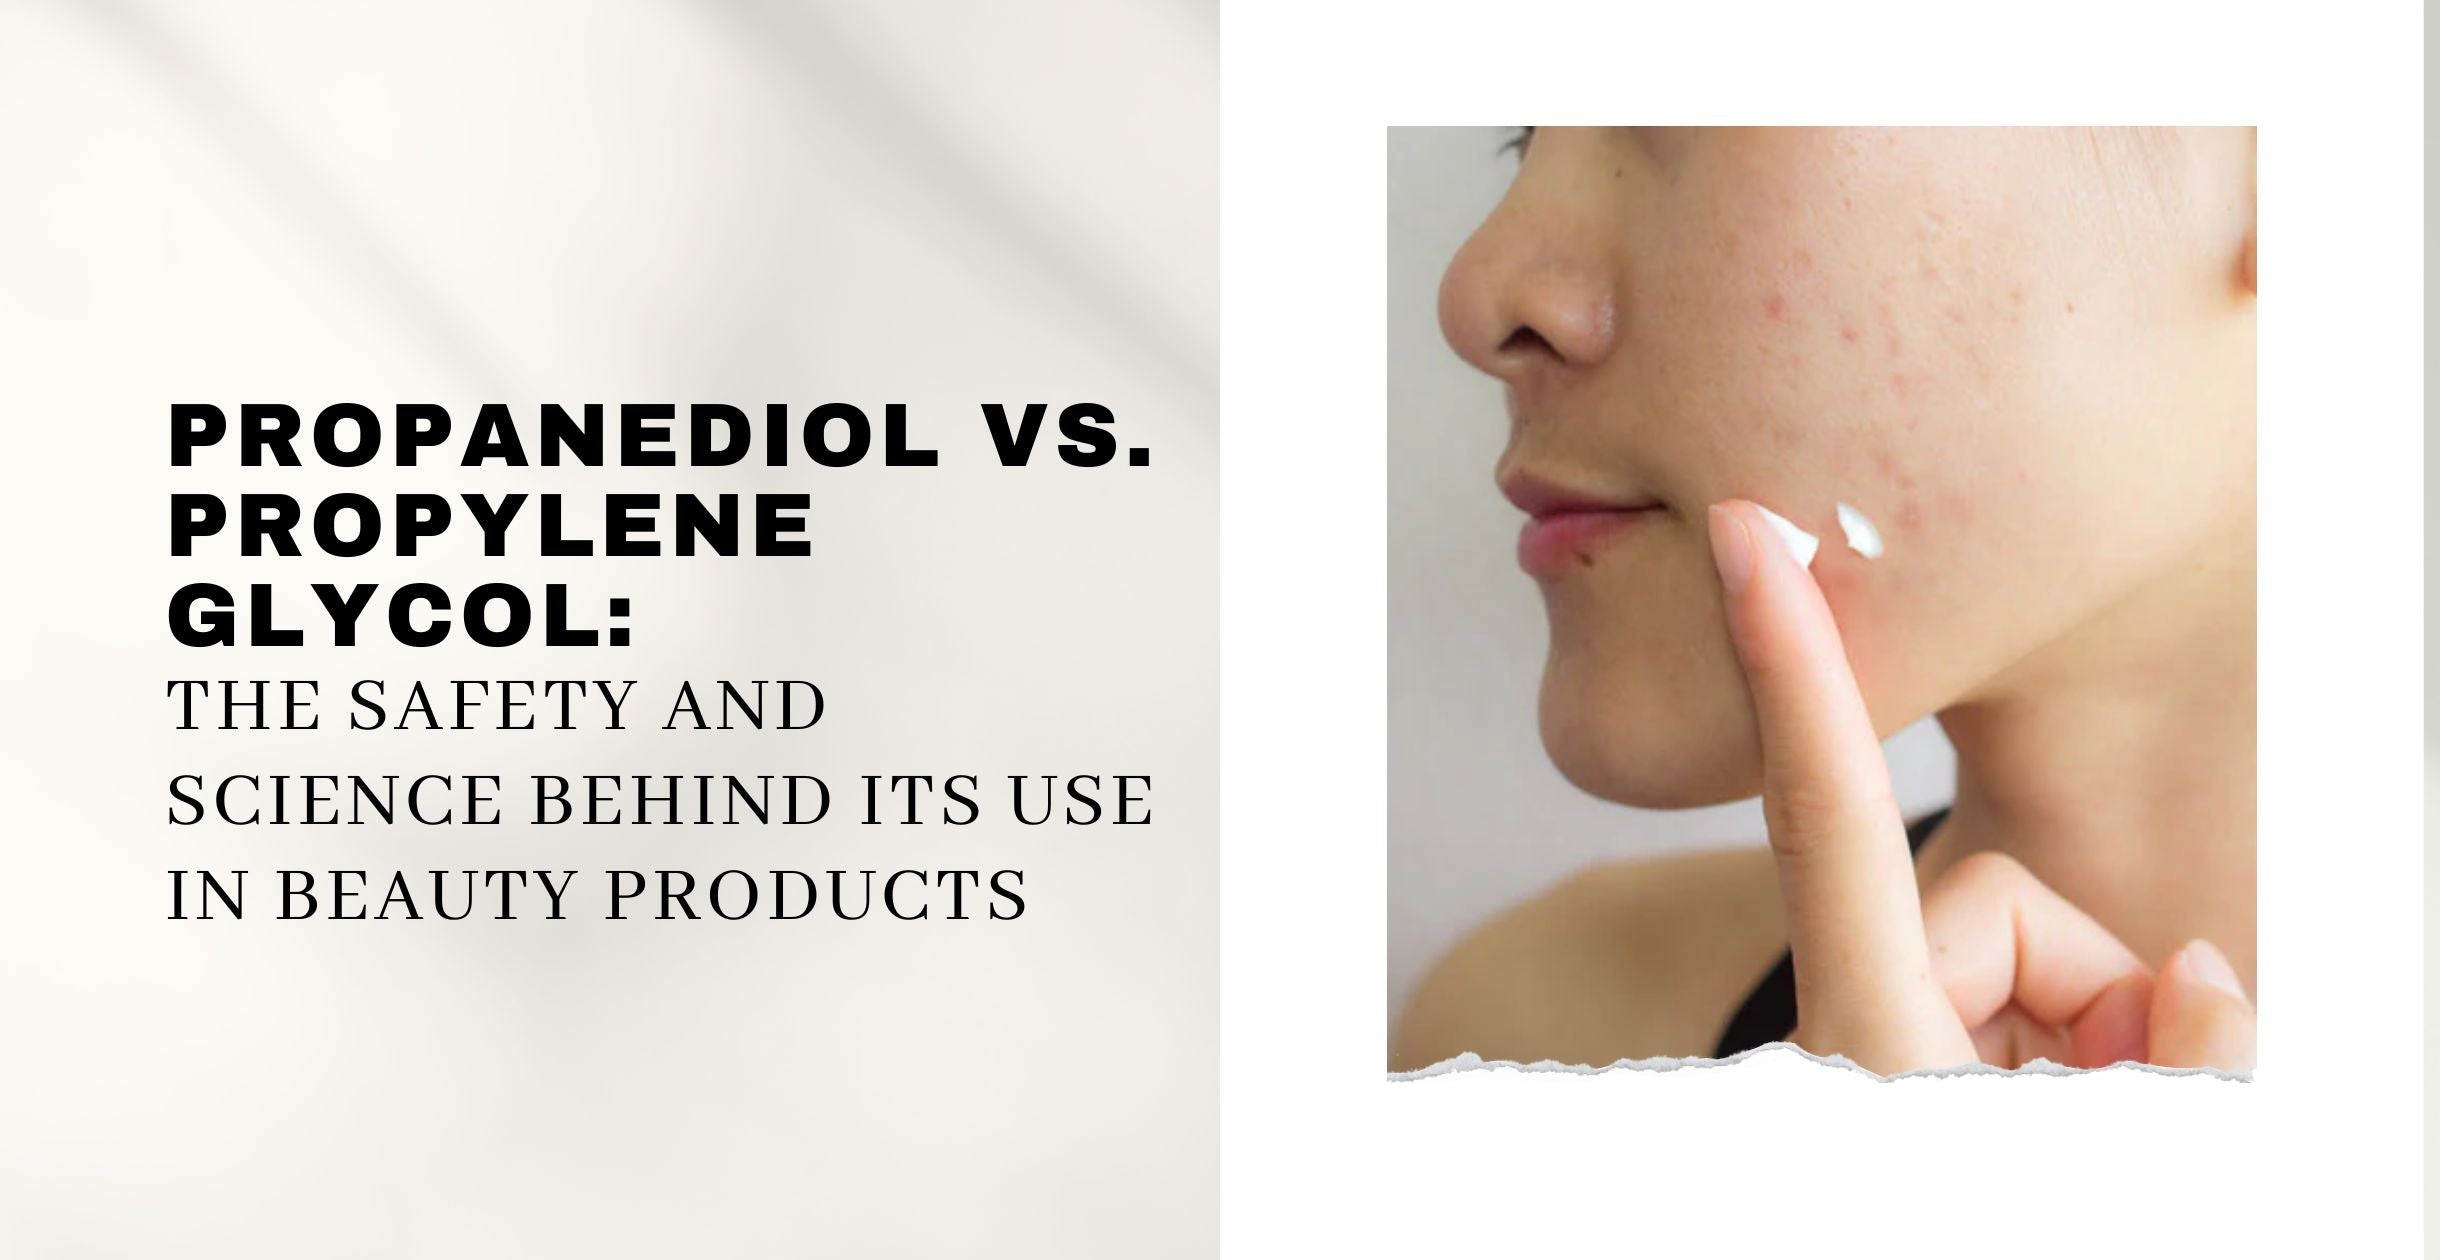 Propanediol vs. Propylene Glycol: The Safety and Science Behind Its Use in Beauty Products